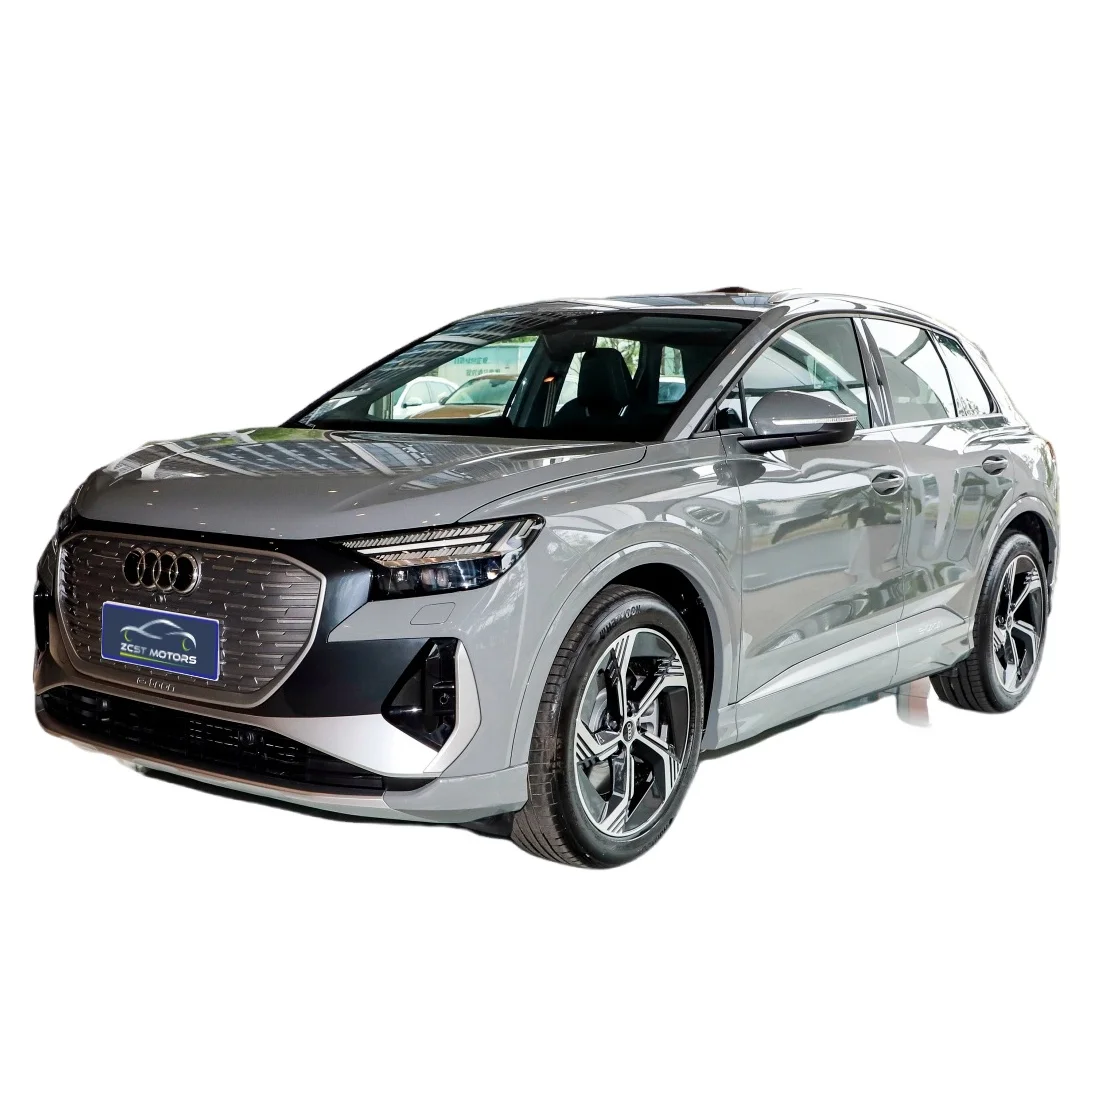 2022 made in China Audi Q4 e tron pure electric Germany high quality luxury car